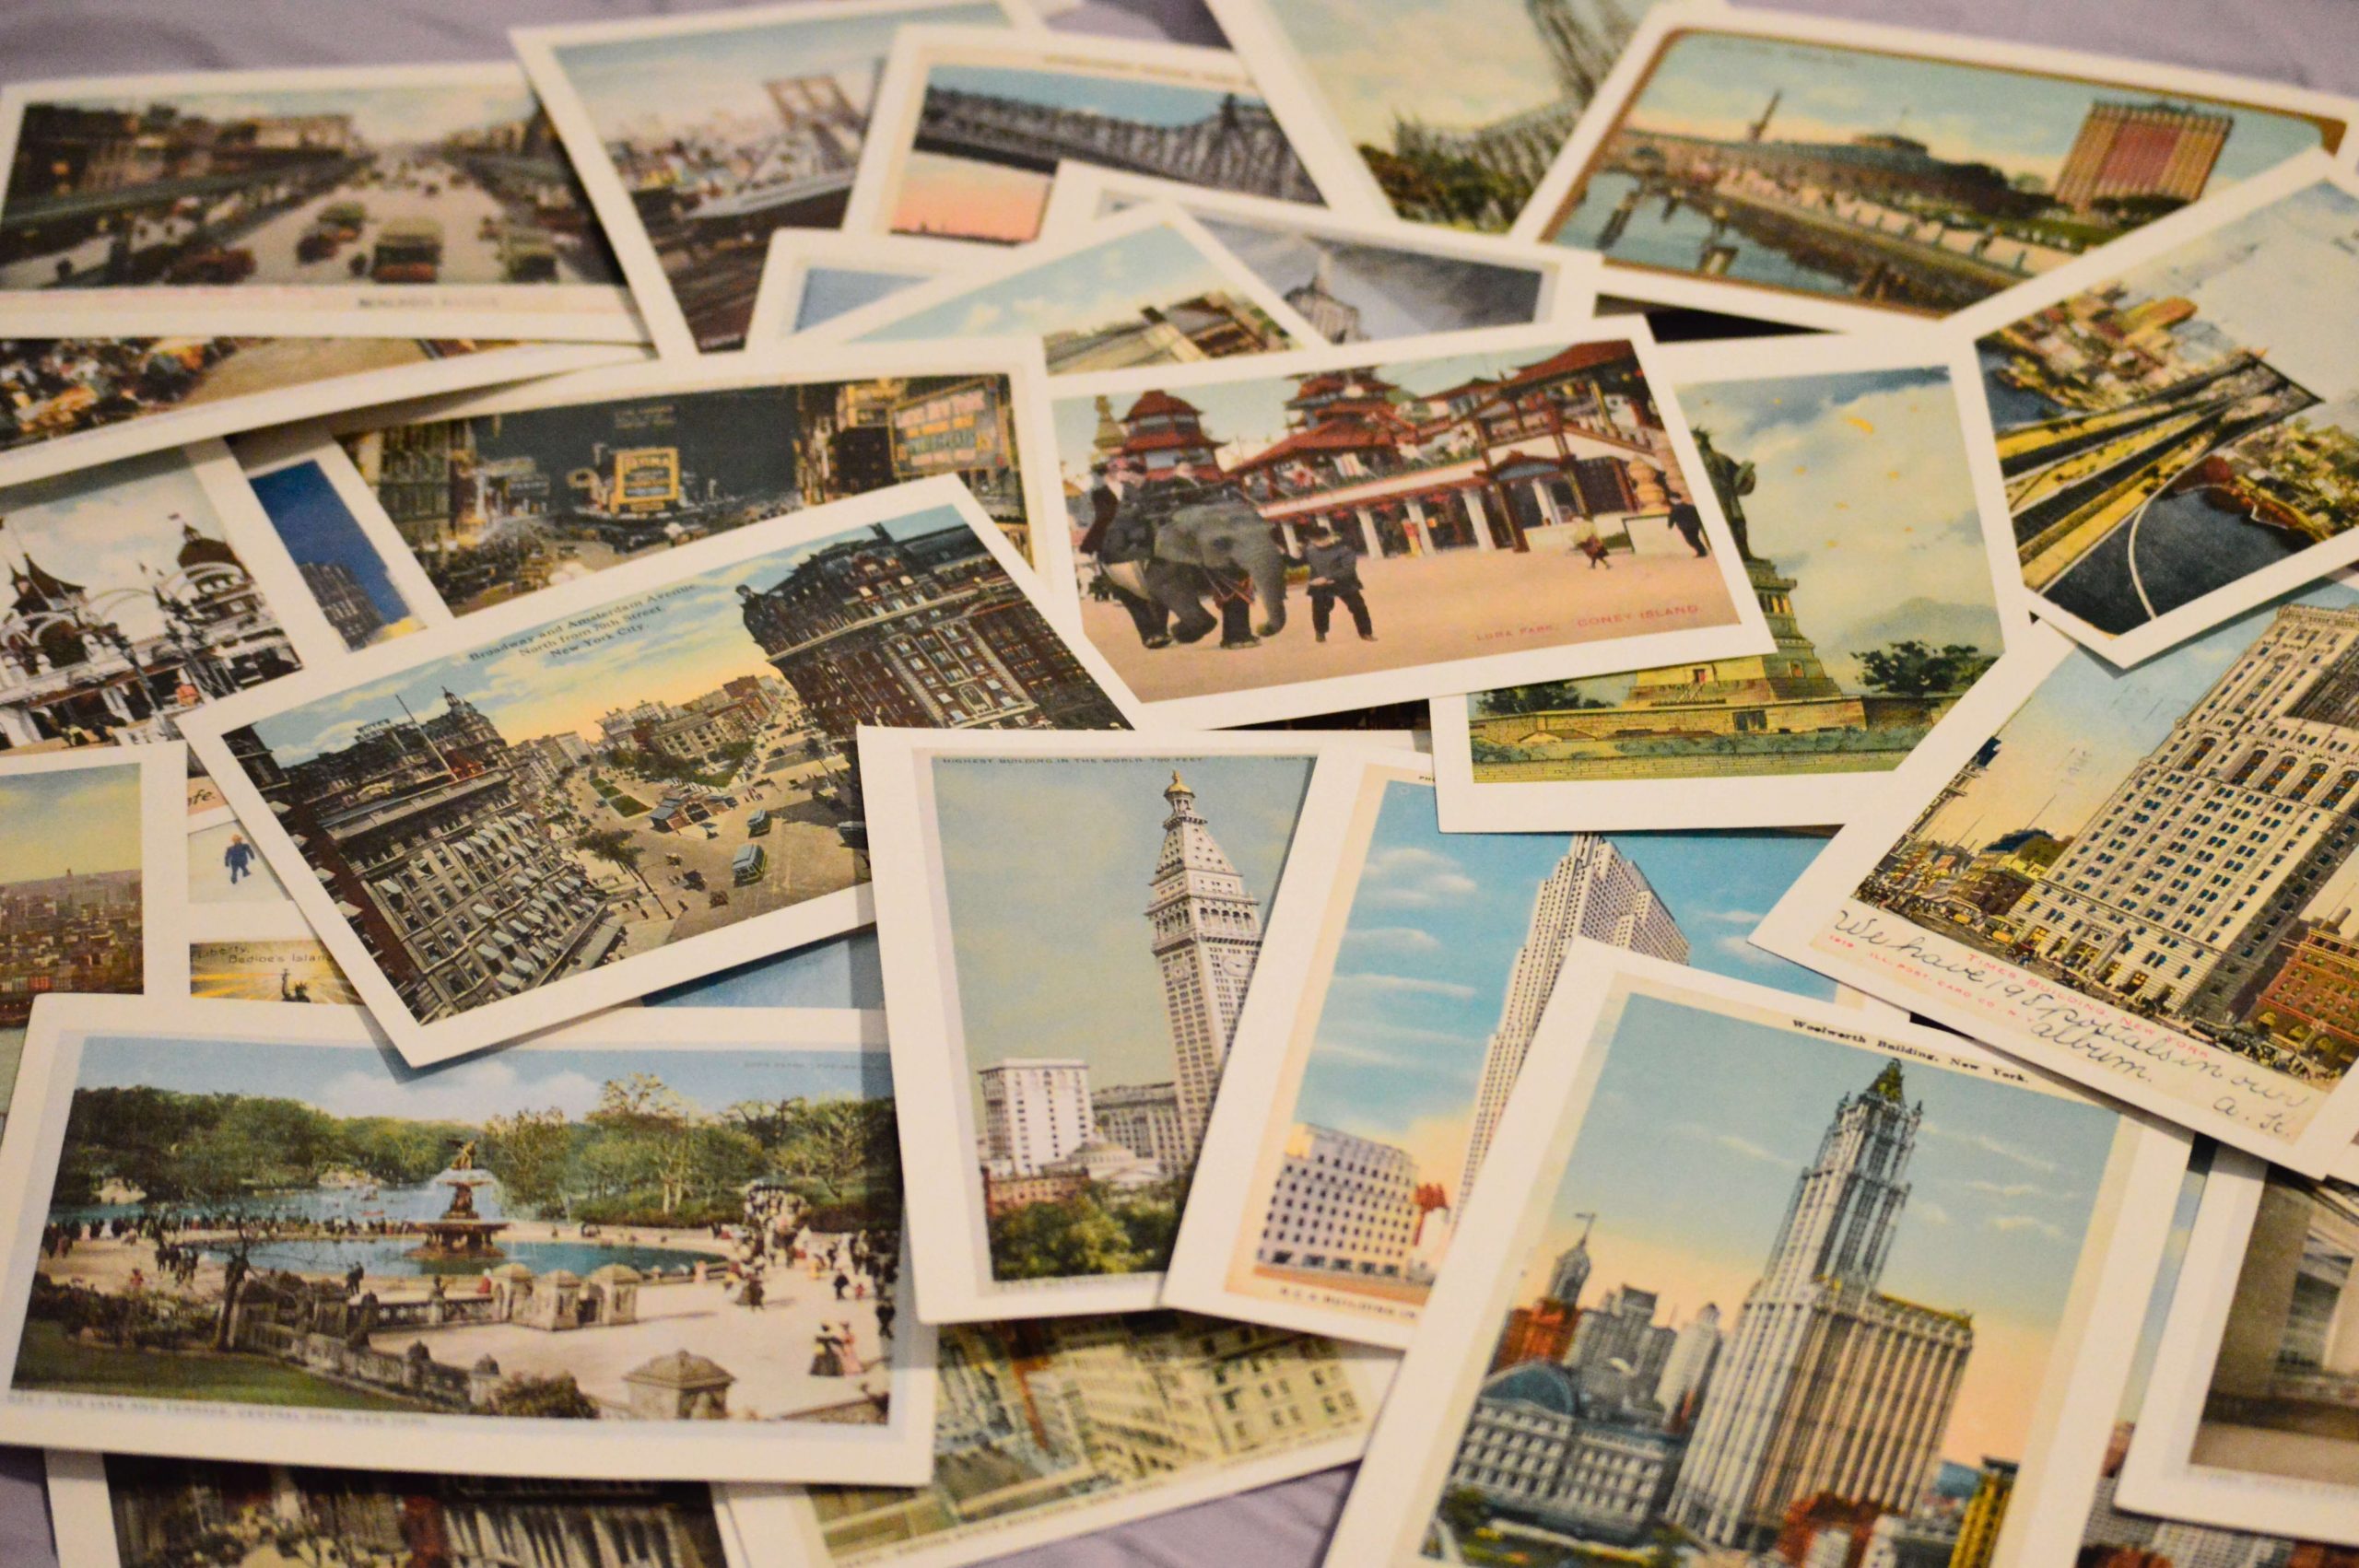 Short and to the point. What do we love postcards for?